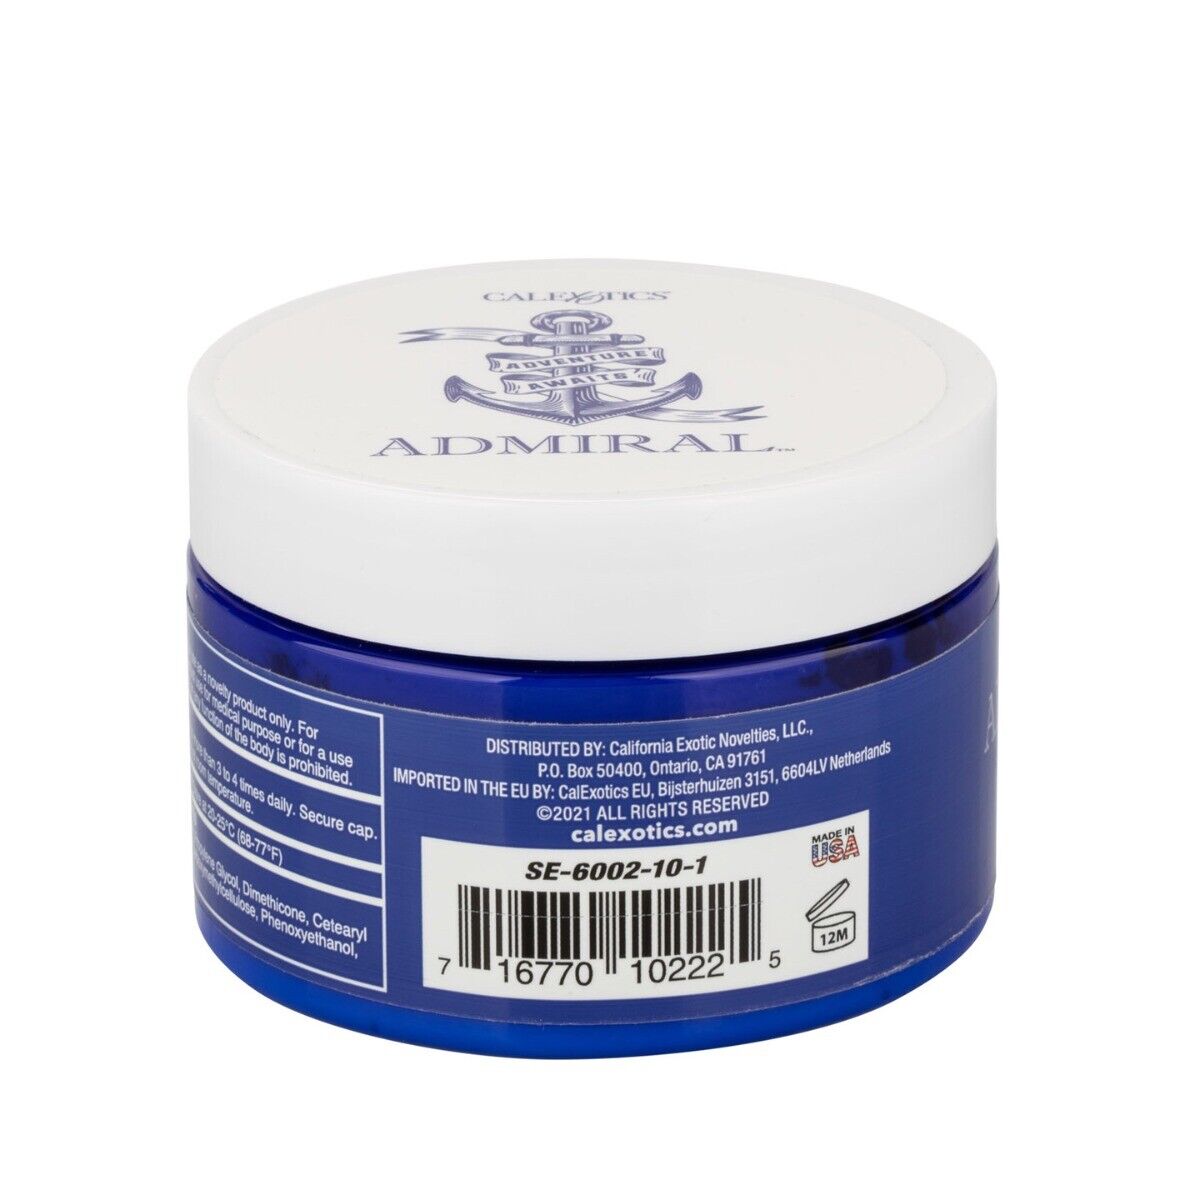 Admiral Heavy Hand Fisting Play Gel Cream Desensitizing Personal Anal Lubricant